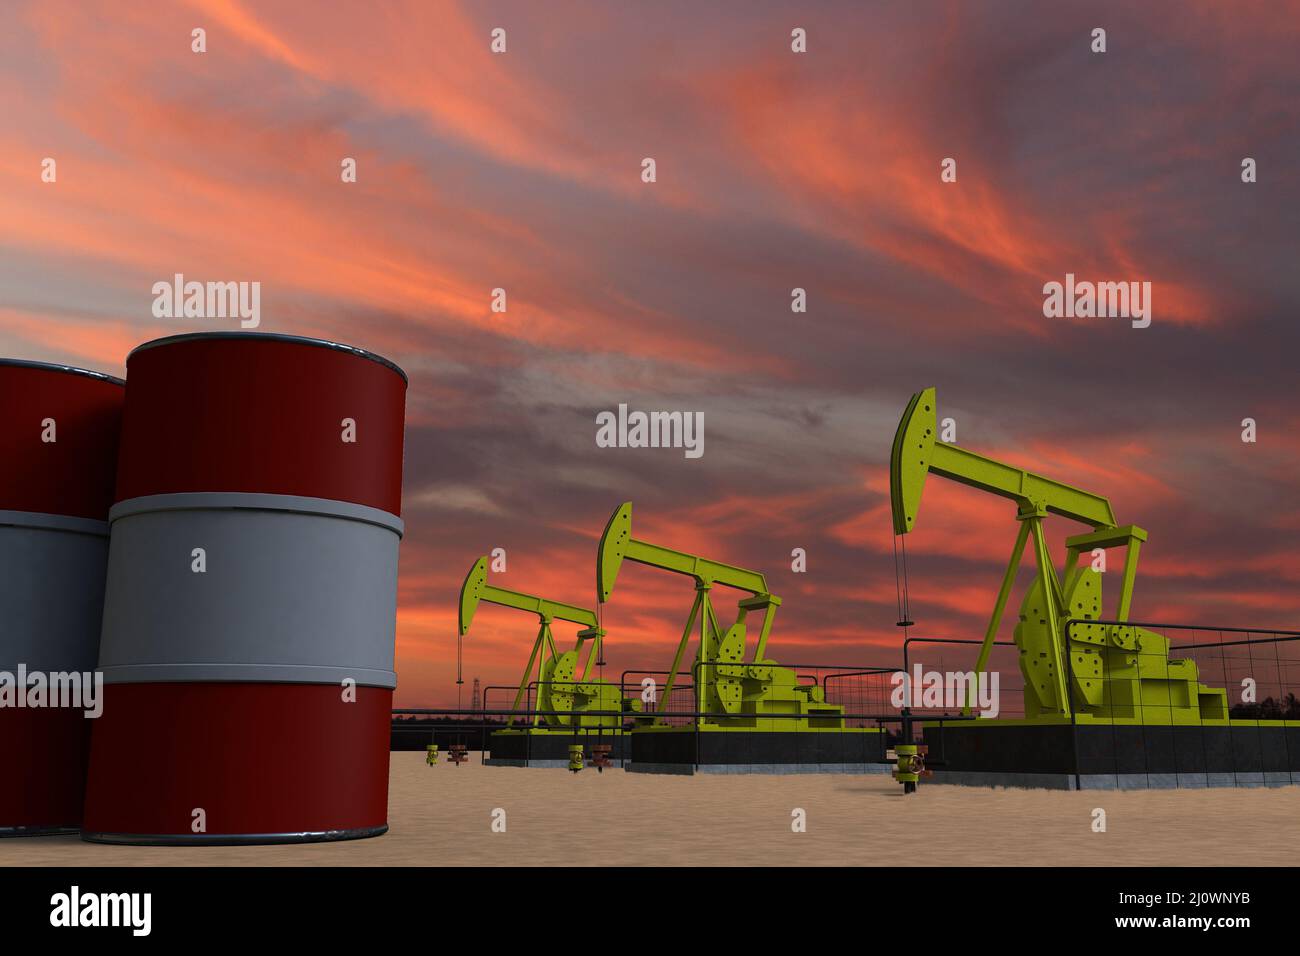 Nice pumpjack oil extraction and cloudy sky in sunset with the AUSTRIA flag on oil barrels 3D rendering Stock Photo